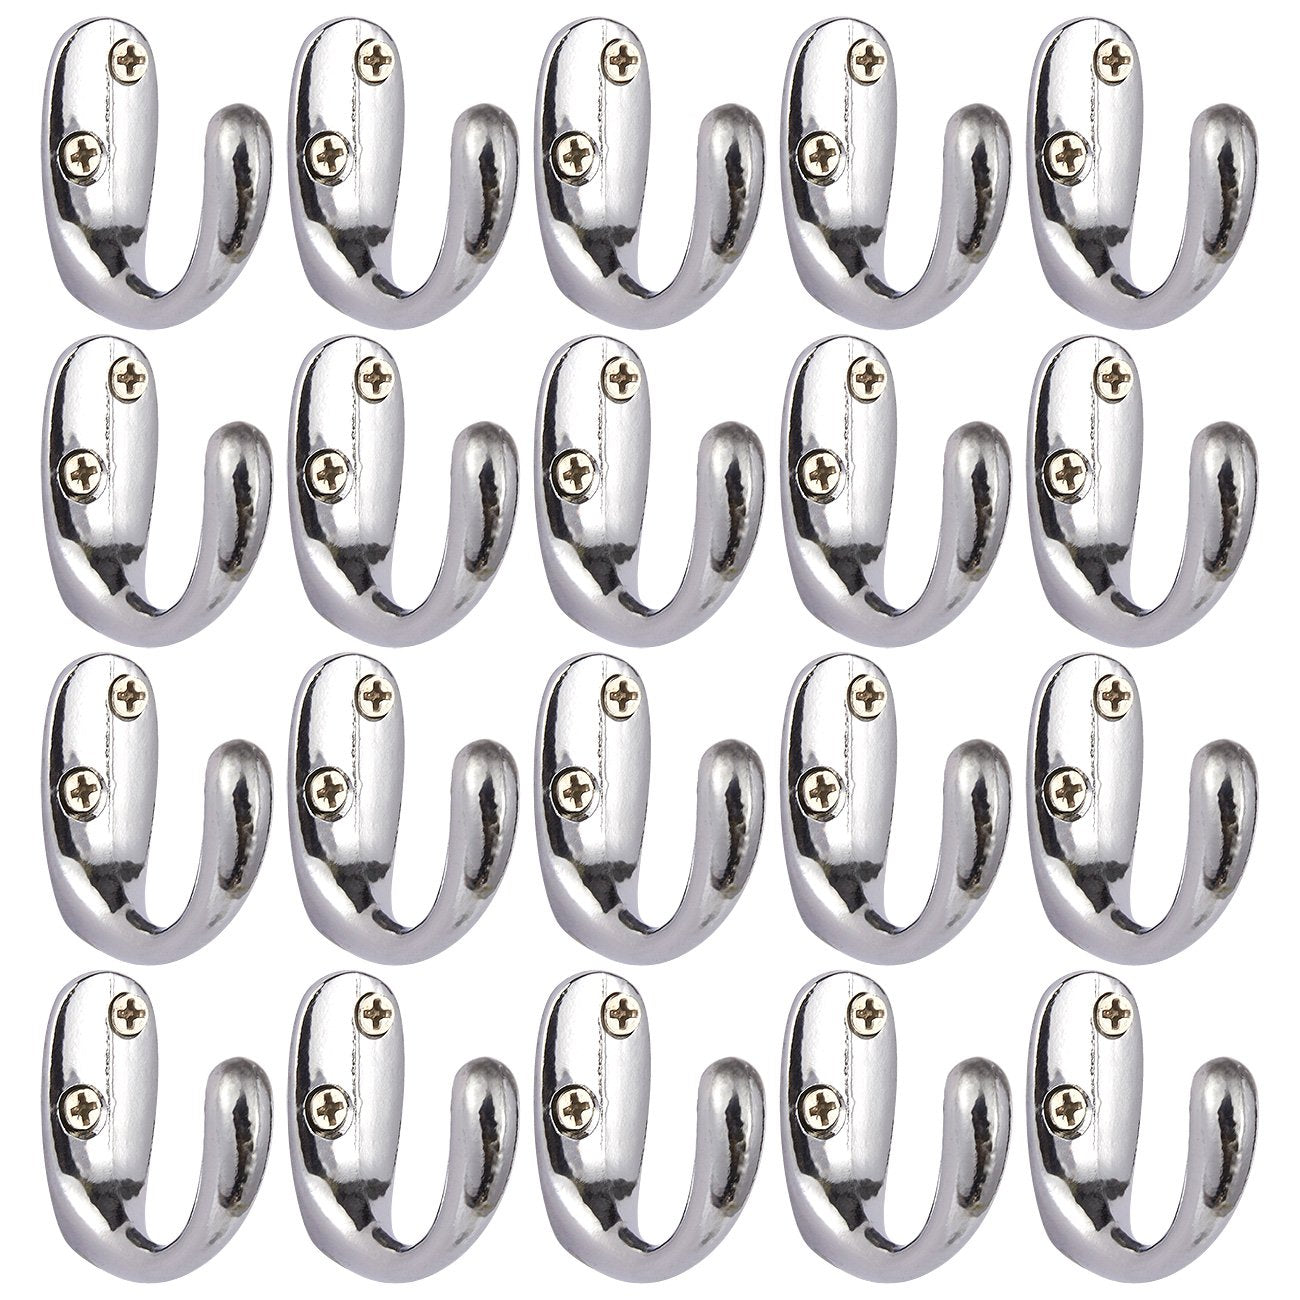 Juvale 20 Pieces Wall Mounted Coat Rack Hooks - Hanger Hooks for Robes, Coats, Clothes - Includes 40 Screws, 1.25 x 1.3 Inches, Silver